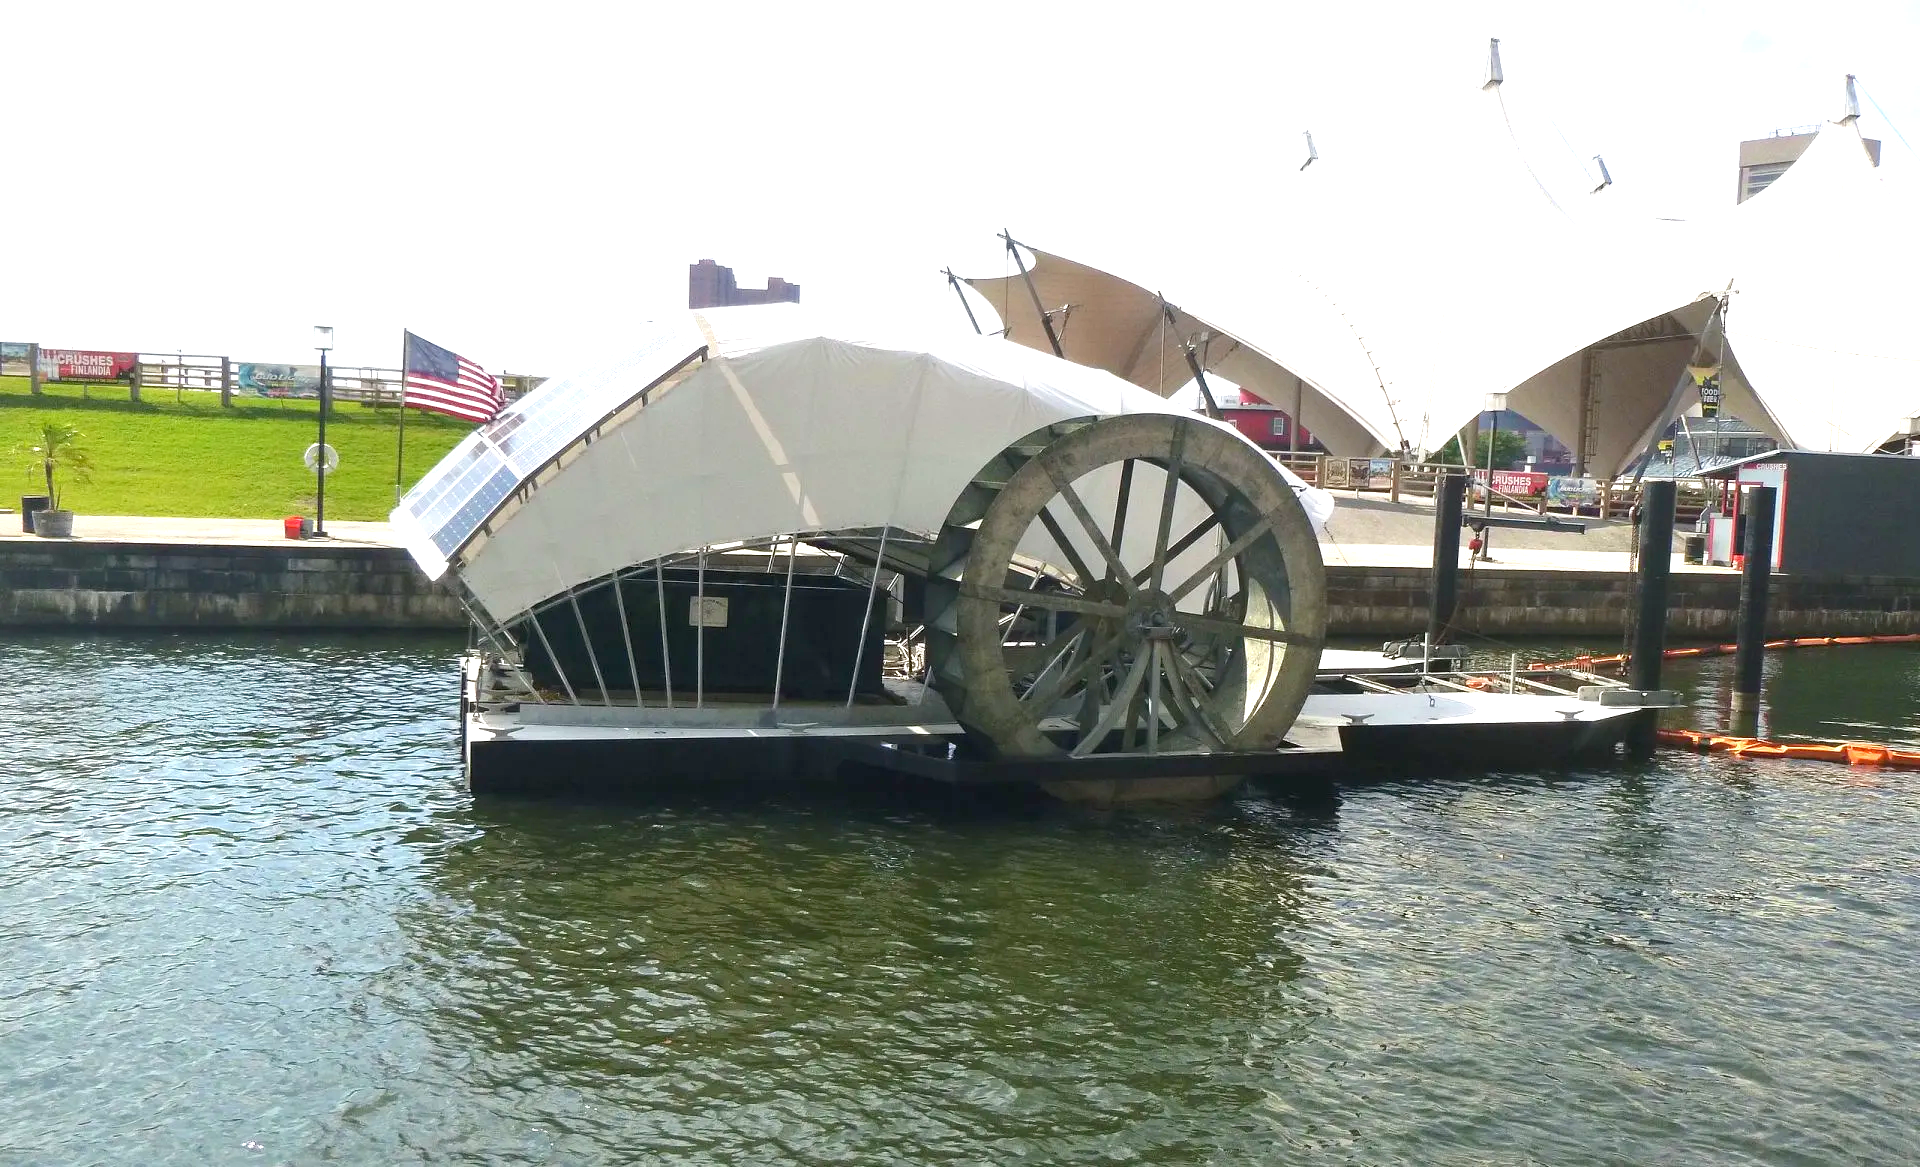 Most Floating Debris Removed by a Trash Receptor in One Month: Mr. Trash Wheel sets world record